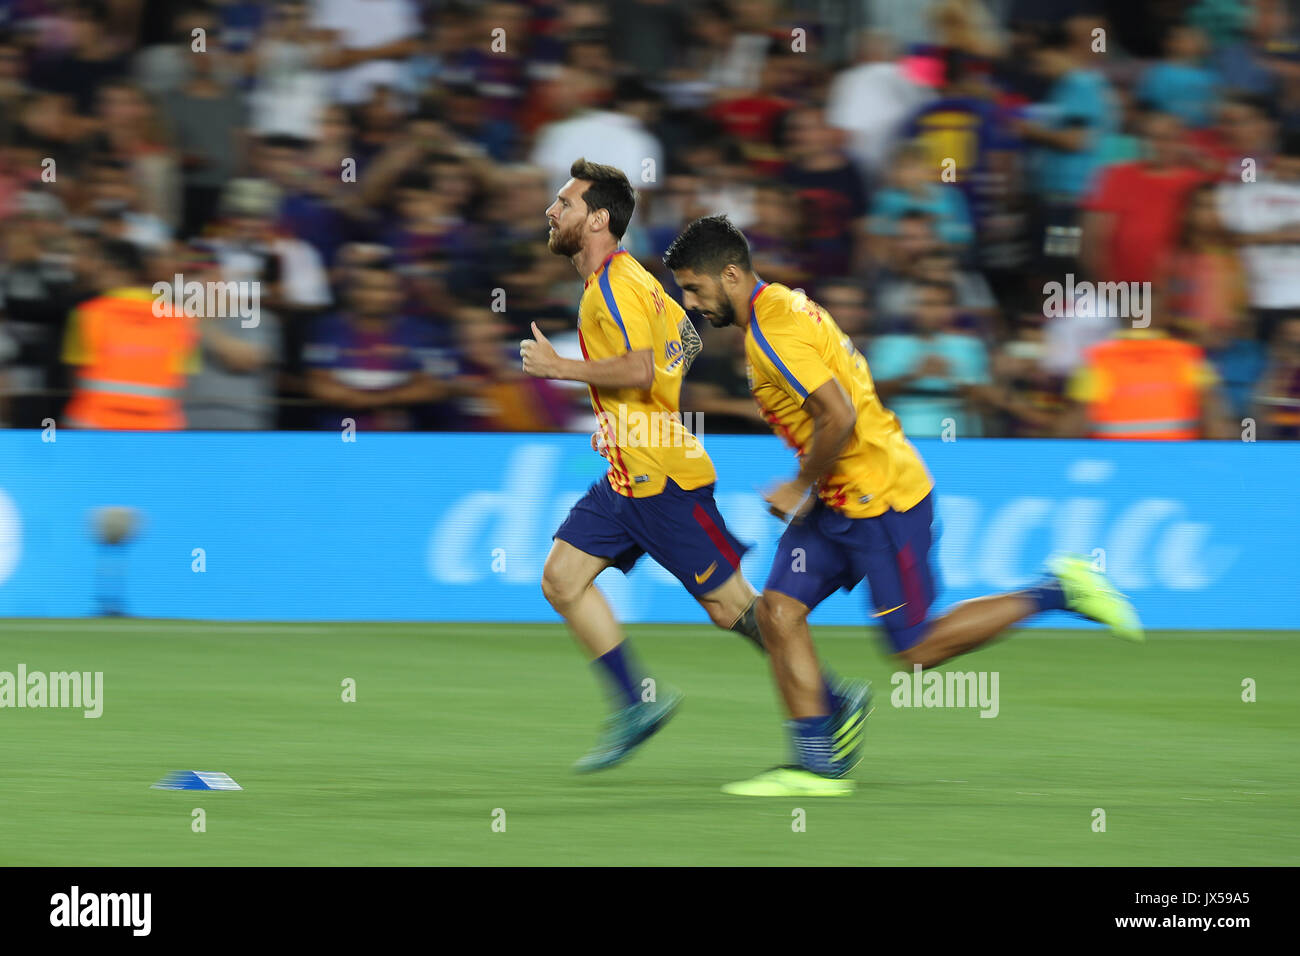 Barcelona, Spain. 13th Aug, 2017. LIONEL MESSI of FC Barcelona warms up ahead of the Spanish Super Cup football match between FC Barcelona and Real Madrid on August 13, 2017 at Camp Nou stadium in Barcelona, Spain. Credit: Manuel Blondeau/ZUMA Wire/Alamy Live News Stock Photo